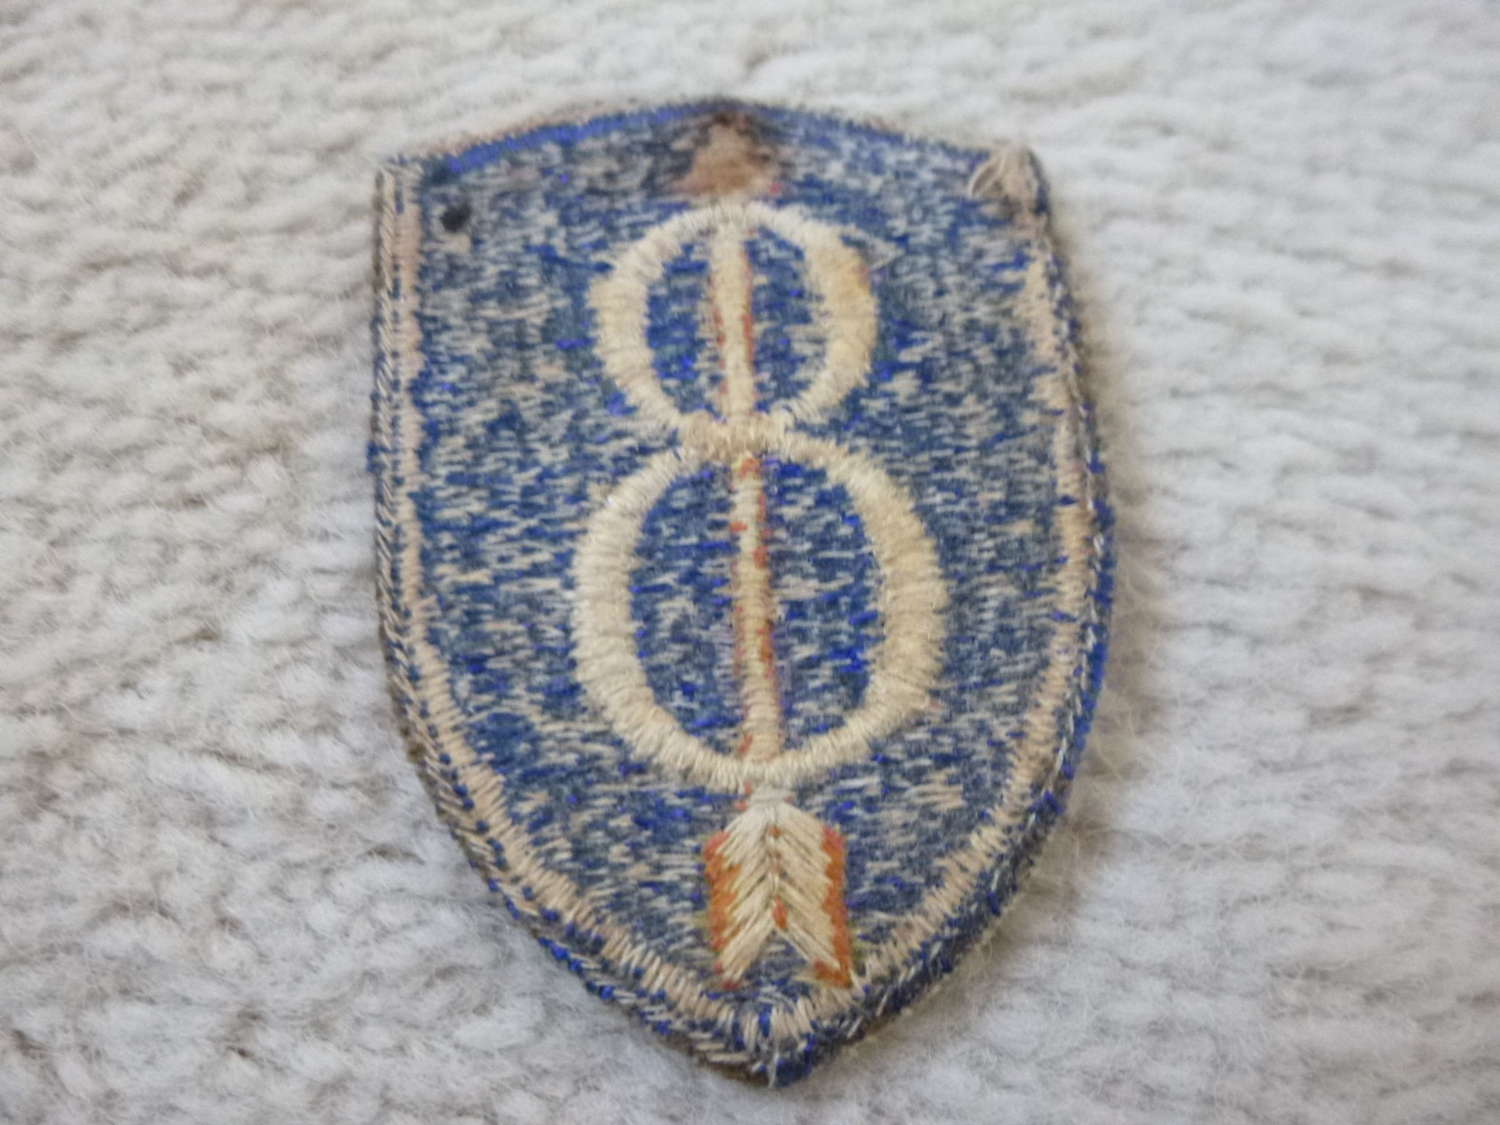 US Army 8th infantry division patch